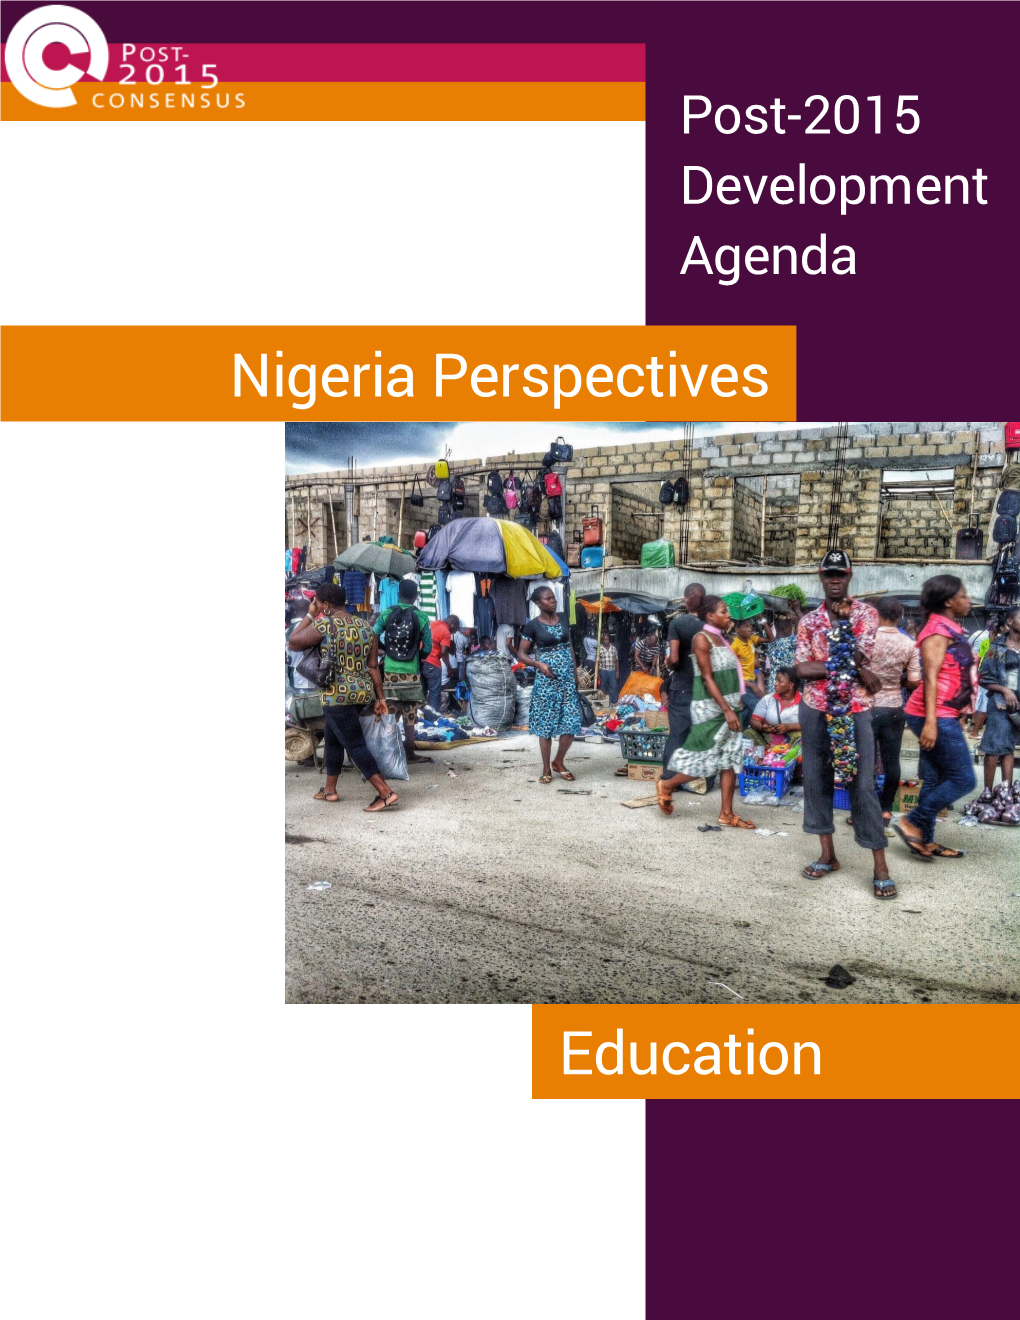 Download the Nigeria Perspectives: Education Resource Packet